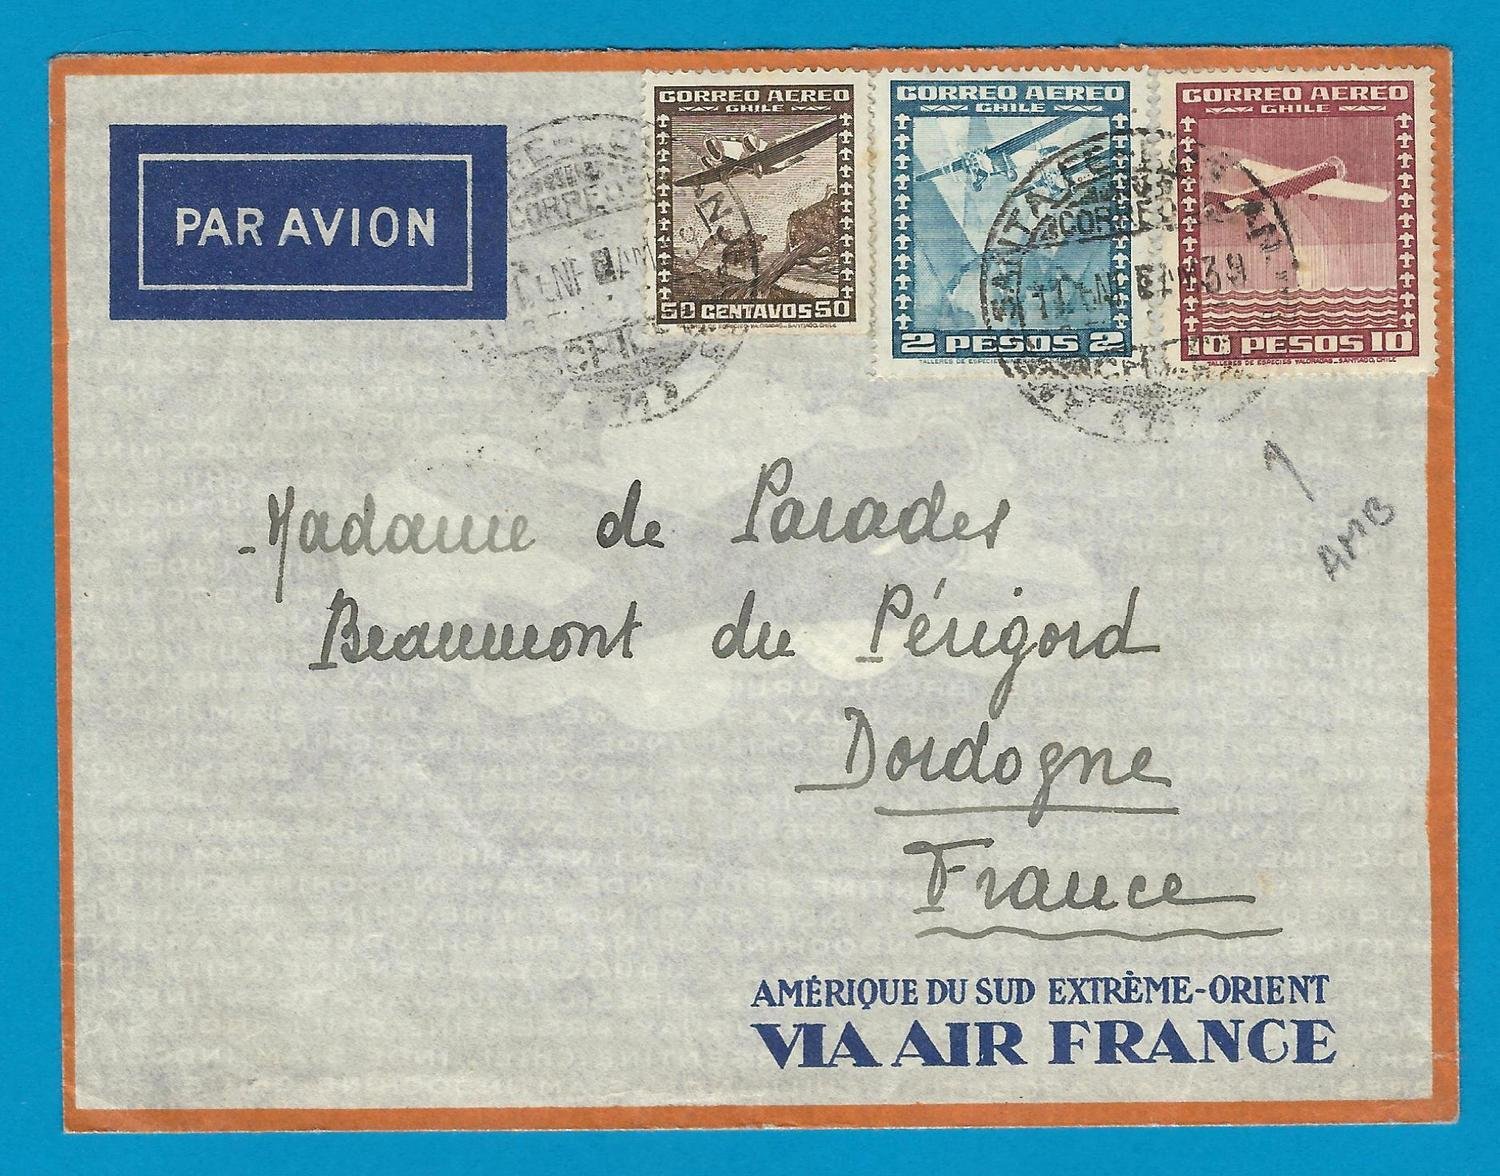 CHILE Air France cover 1939 with Ambulancia St Fé